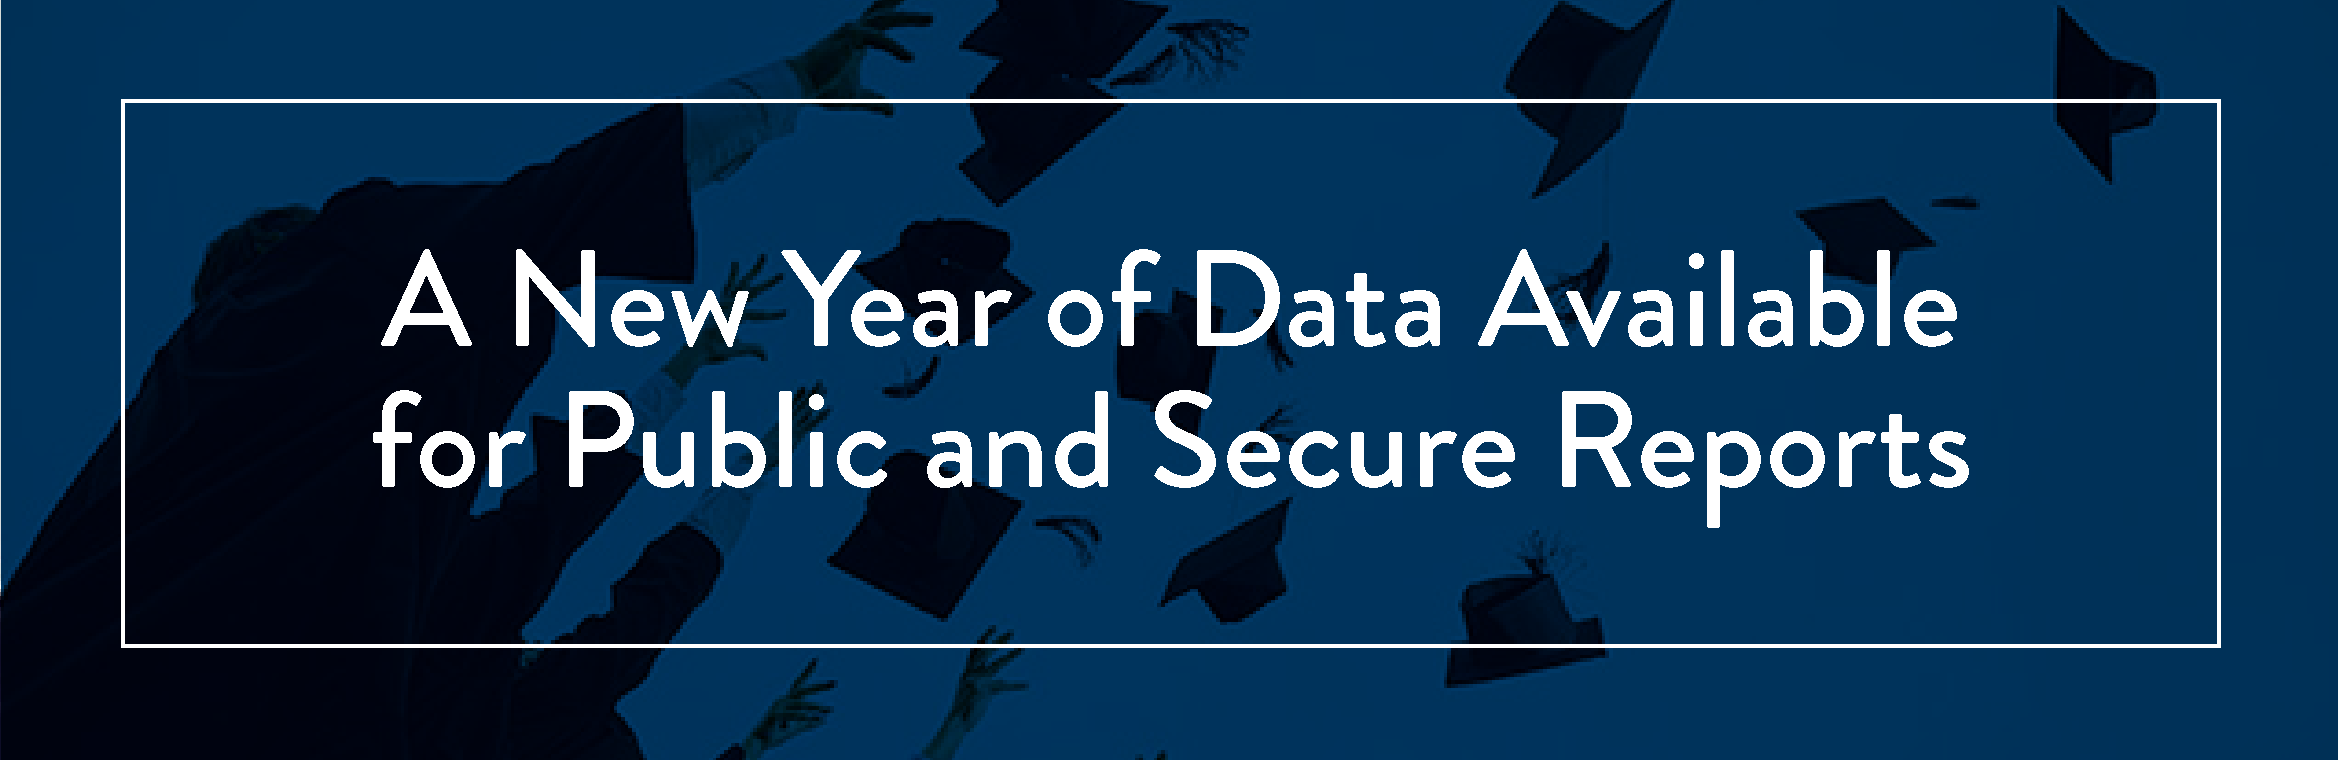 A New Year of Data Available on Public and Secure Reports